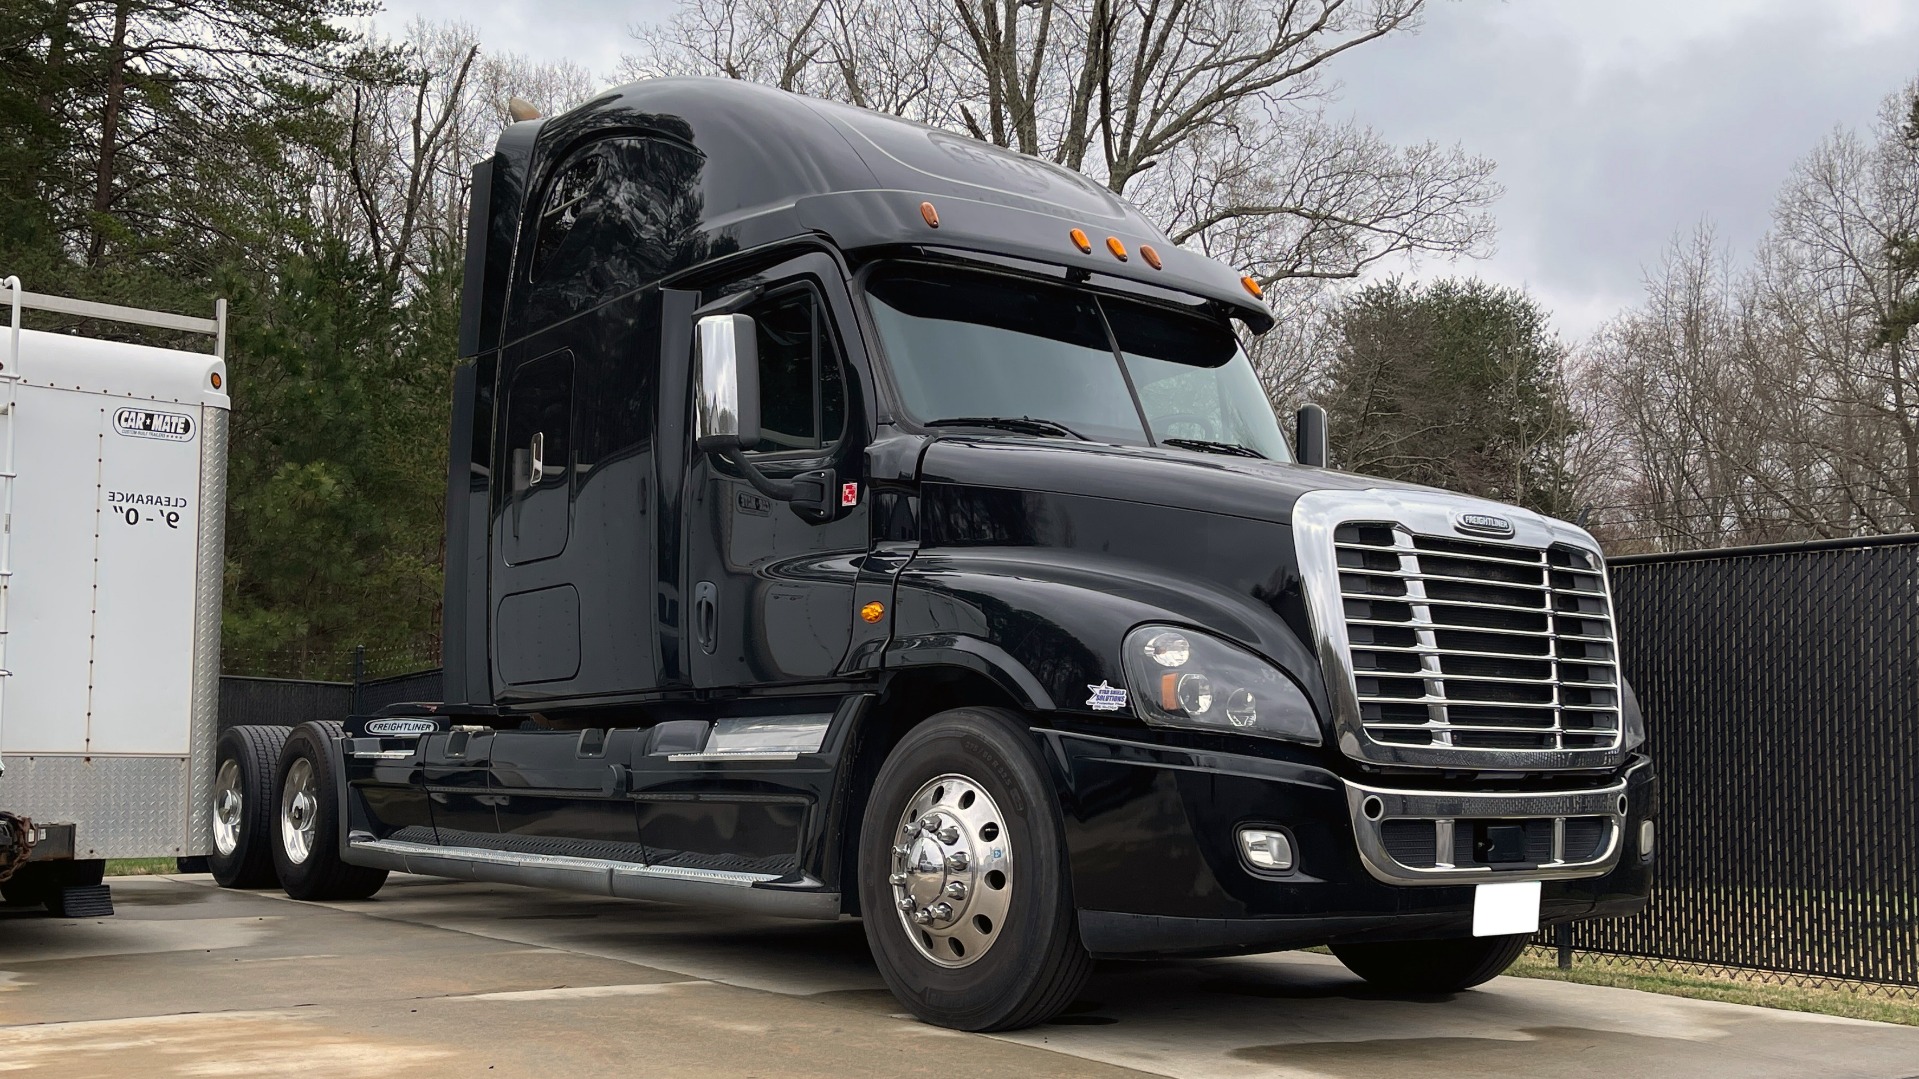 Used 2015 Freightliner CASCADIA ROAD TRACTOR / DETROIT 505HP / 13-SPEED / HTD & CLD STS / FRIG for sale Sold at Formula Imports in Charlotte NC 28227 1